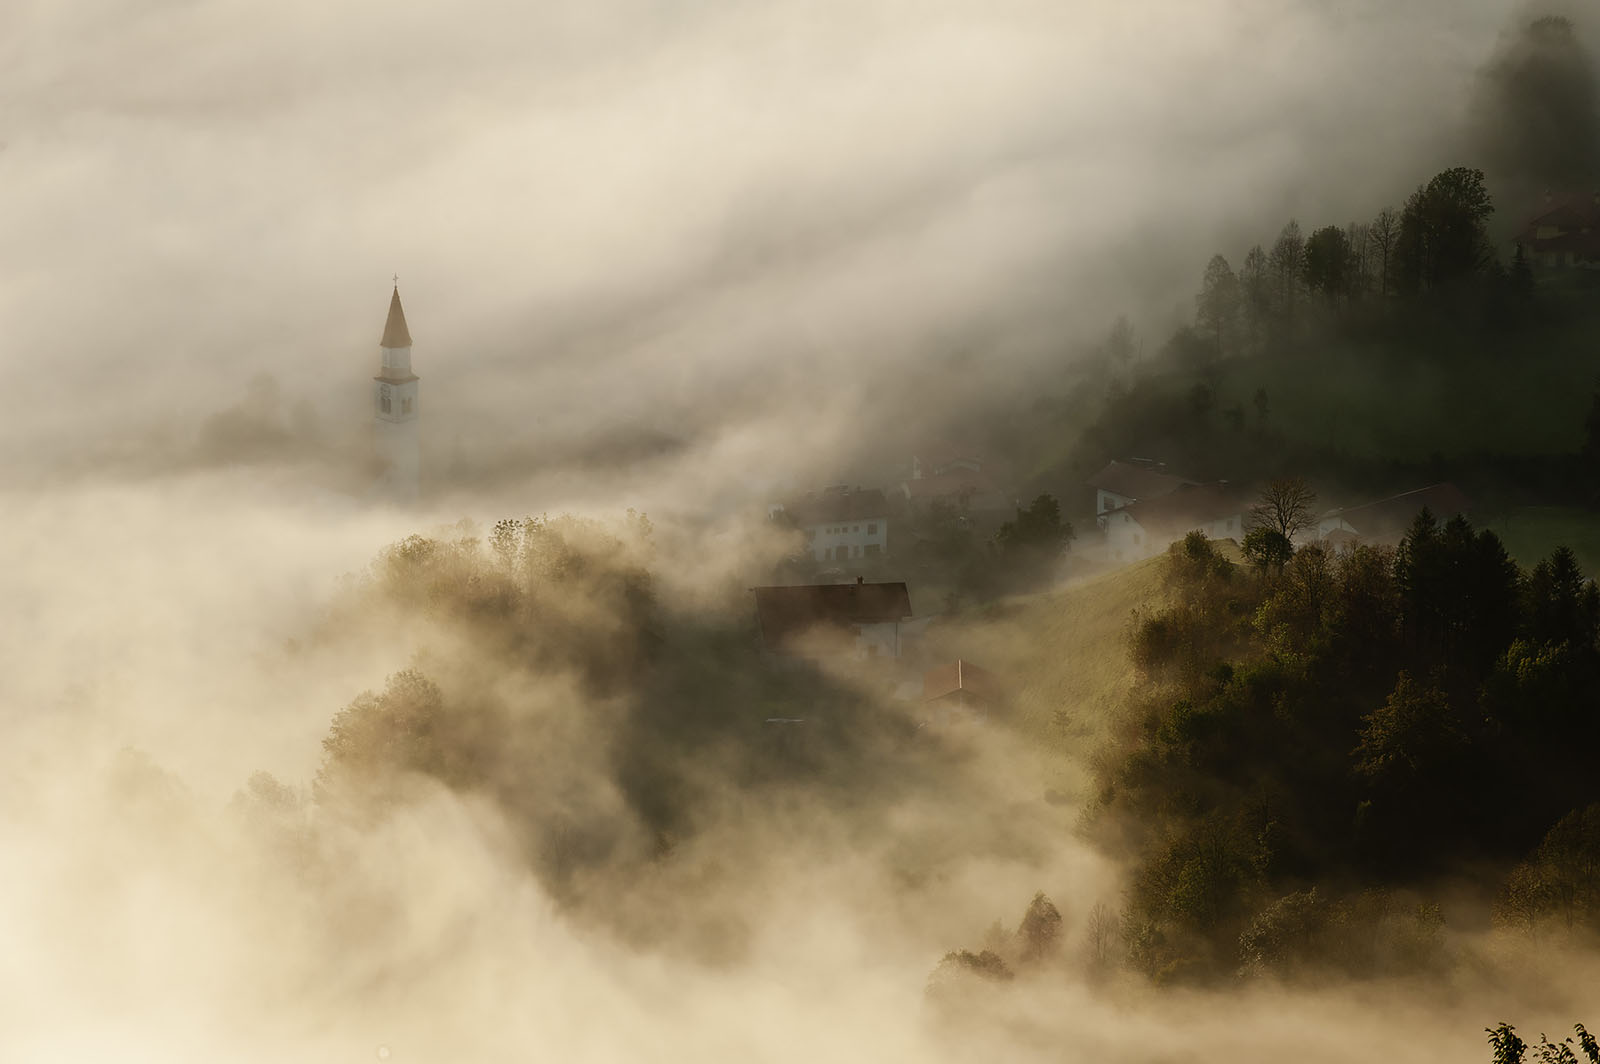 Modern photograph. A wooded valley area flooded with fog. Quaint houses and a clock tower emerge from the fog.